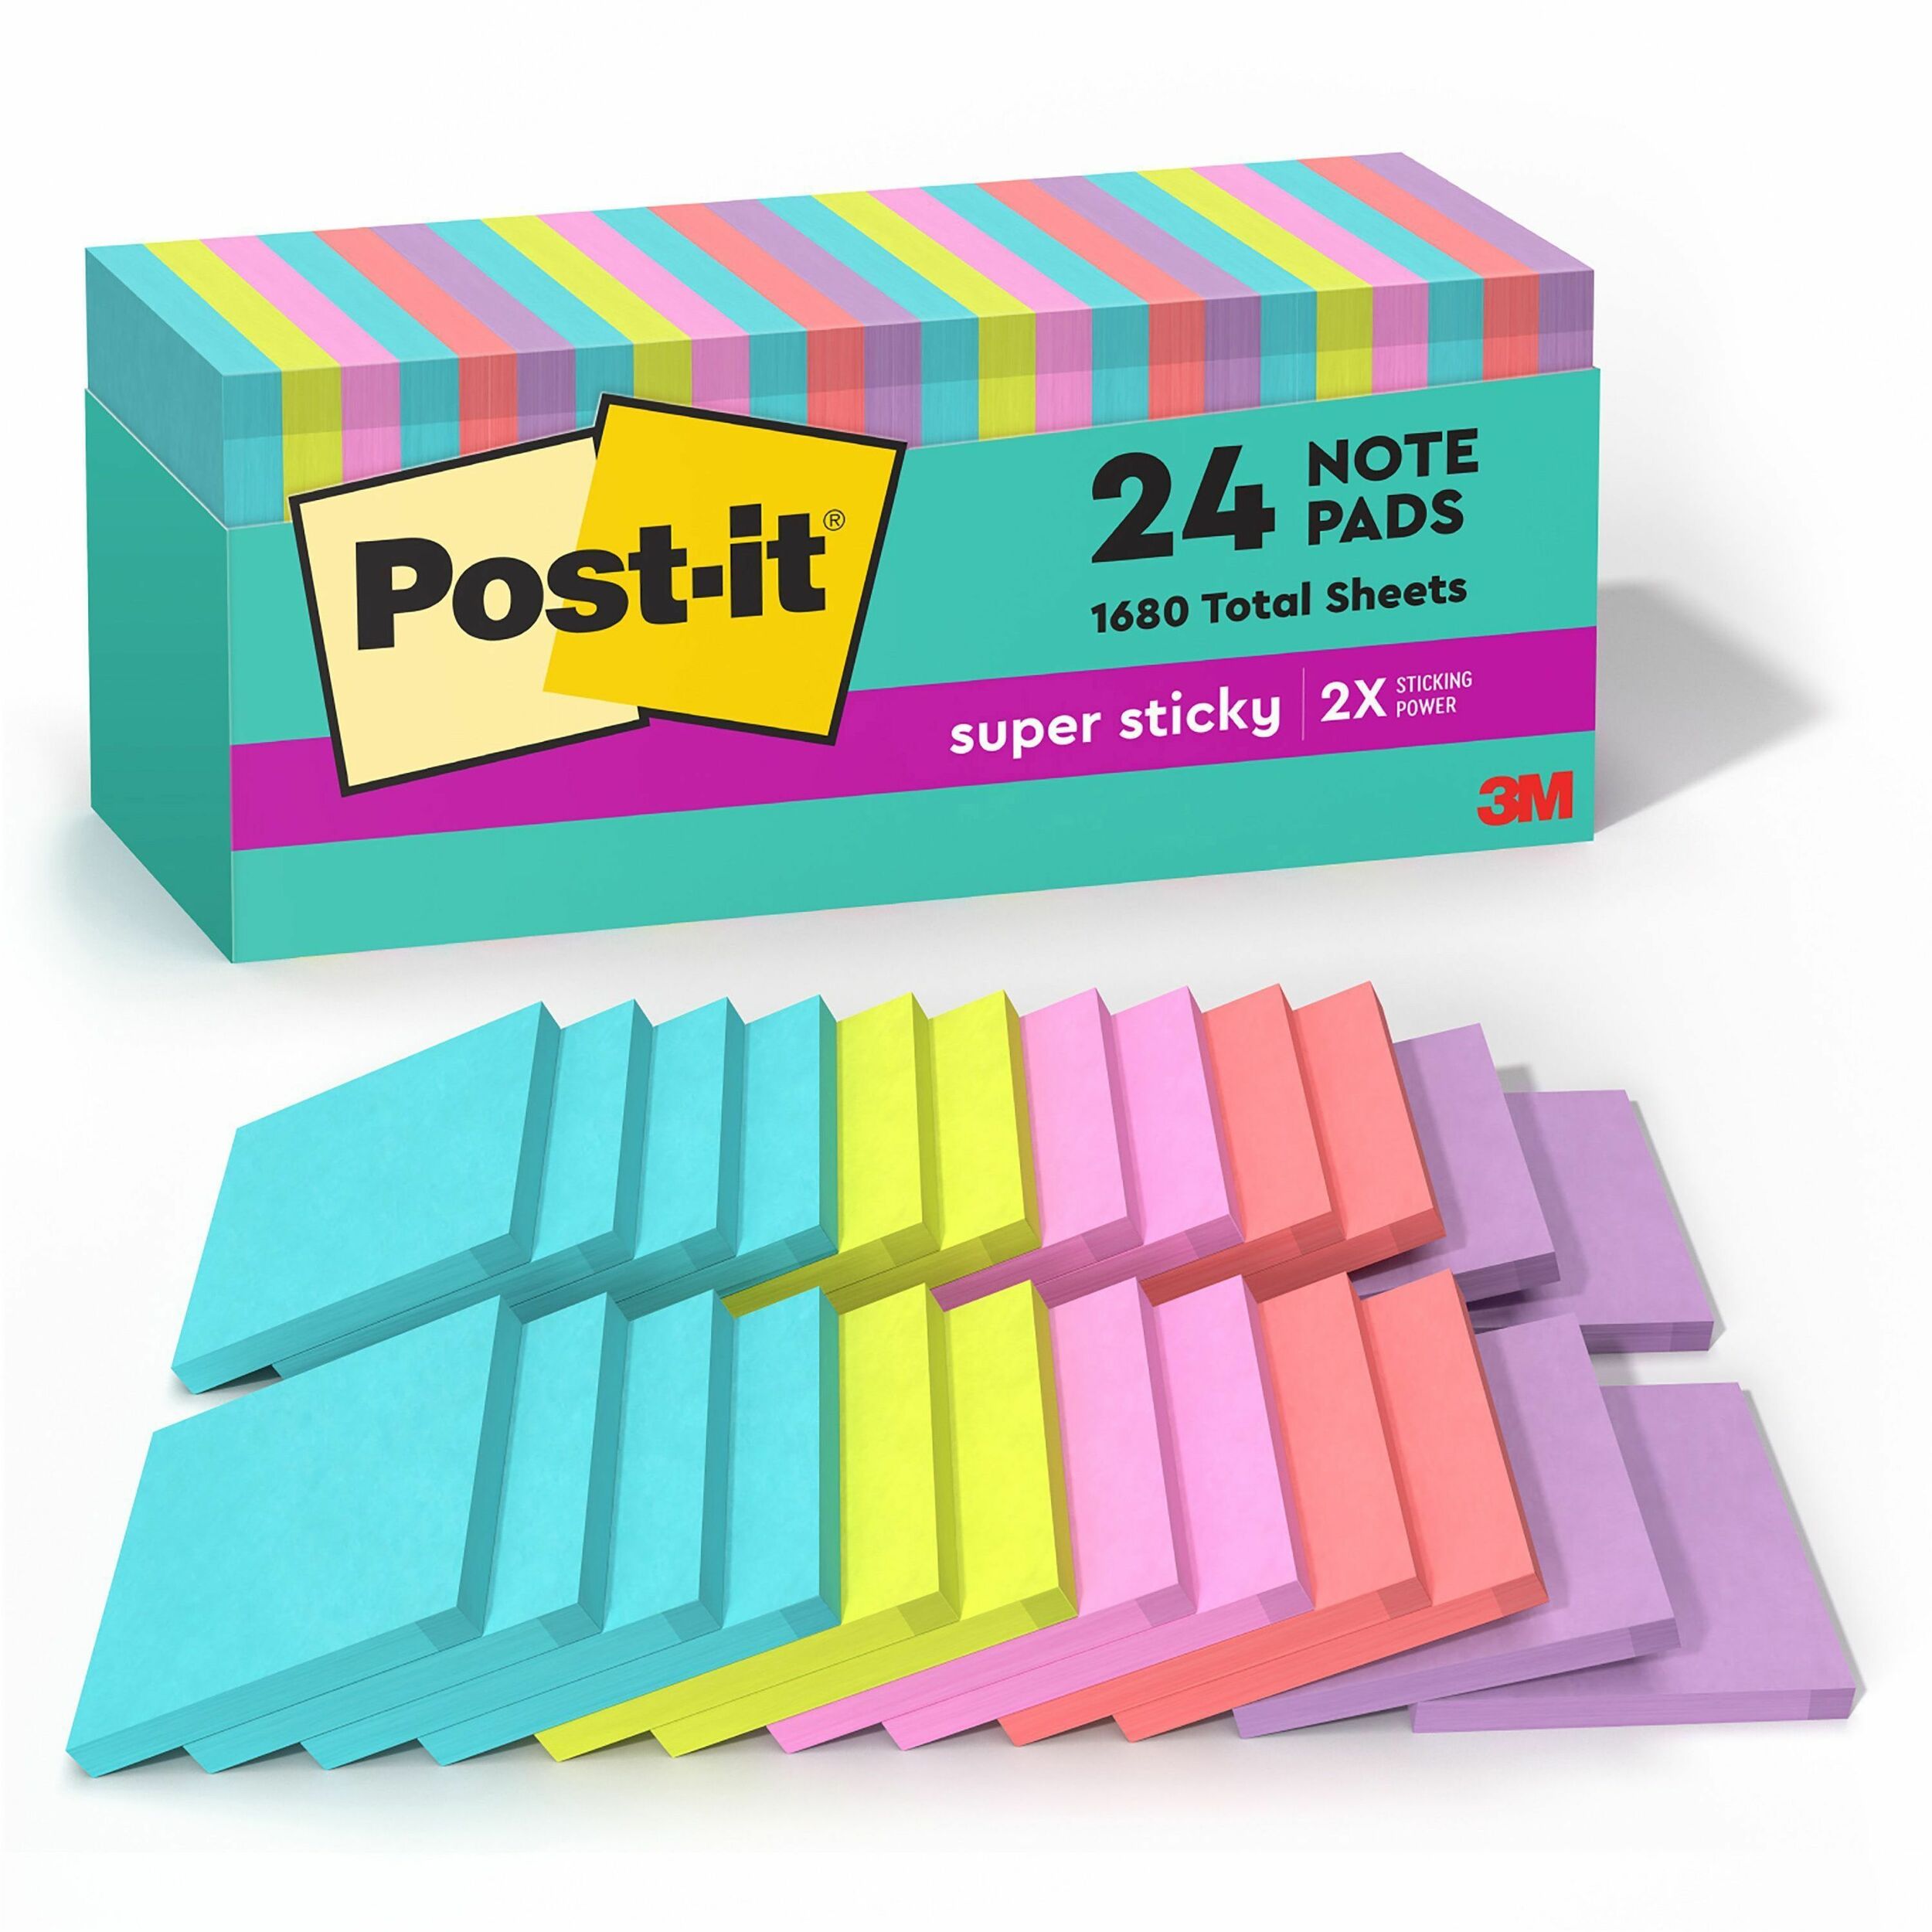 Post-it Super Sticky Notes, Assorted Sizes, 3 Pads, 2x the